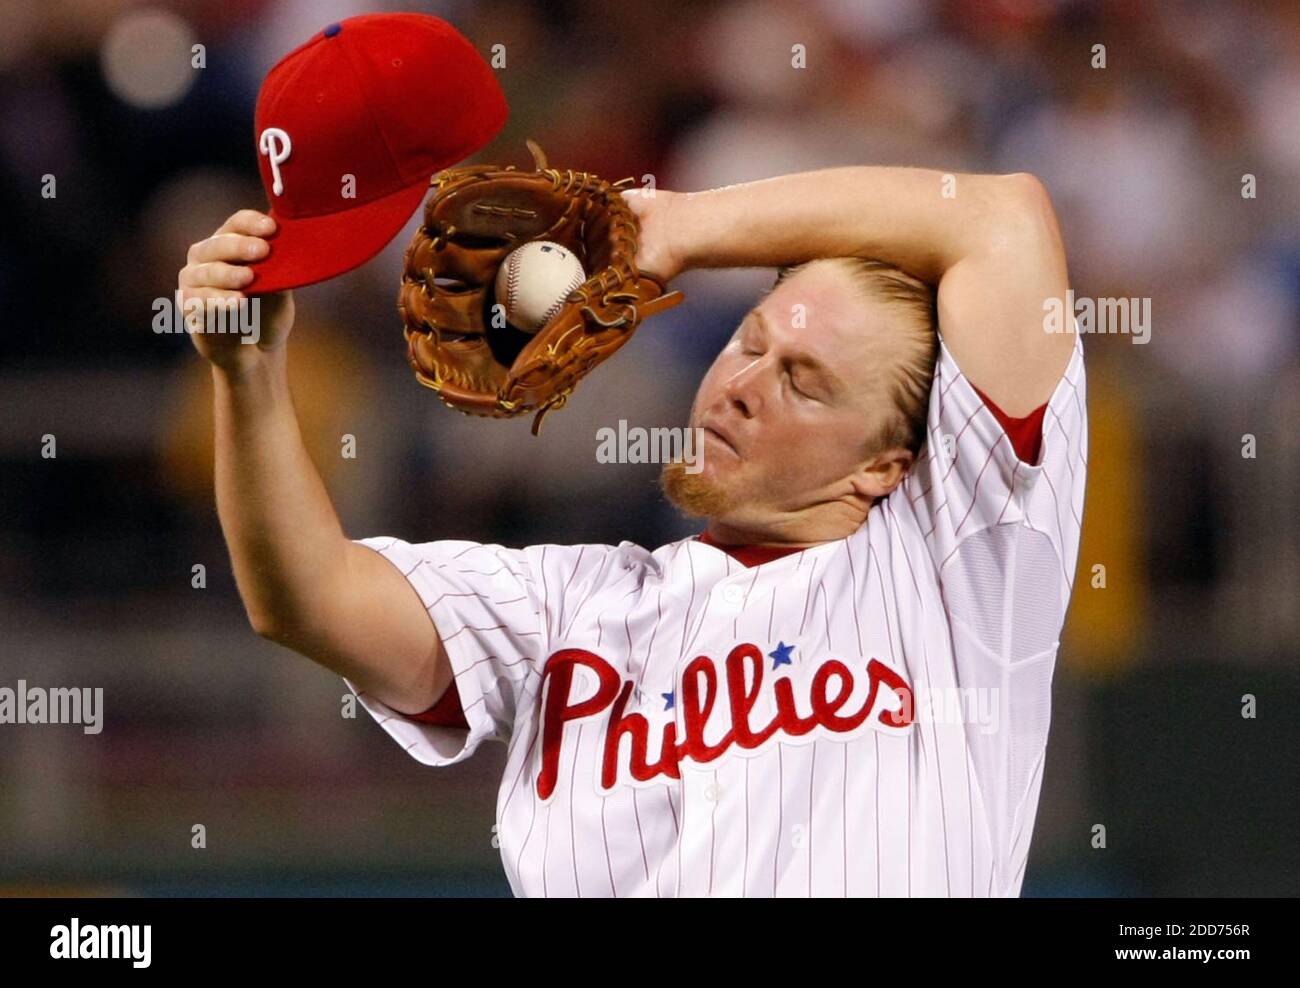 NO FILM, NO VIDEO, NO TV, NO DOCUMENTARY - Philadelphia Phillies starting  pitcher J.D. Durbin gives up a two-run home run to Los Angeles Dodgers' Andre  Ethier in the fourth inning at